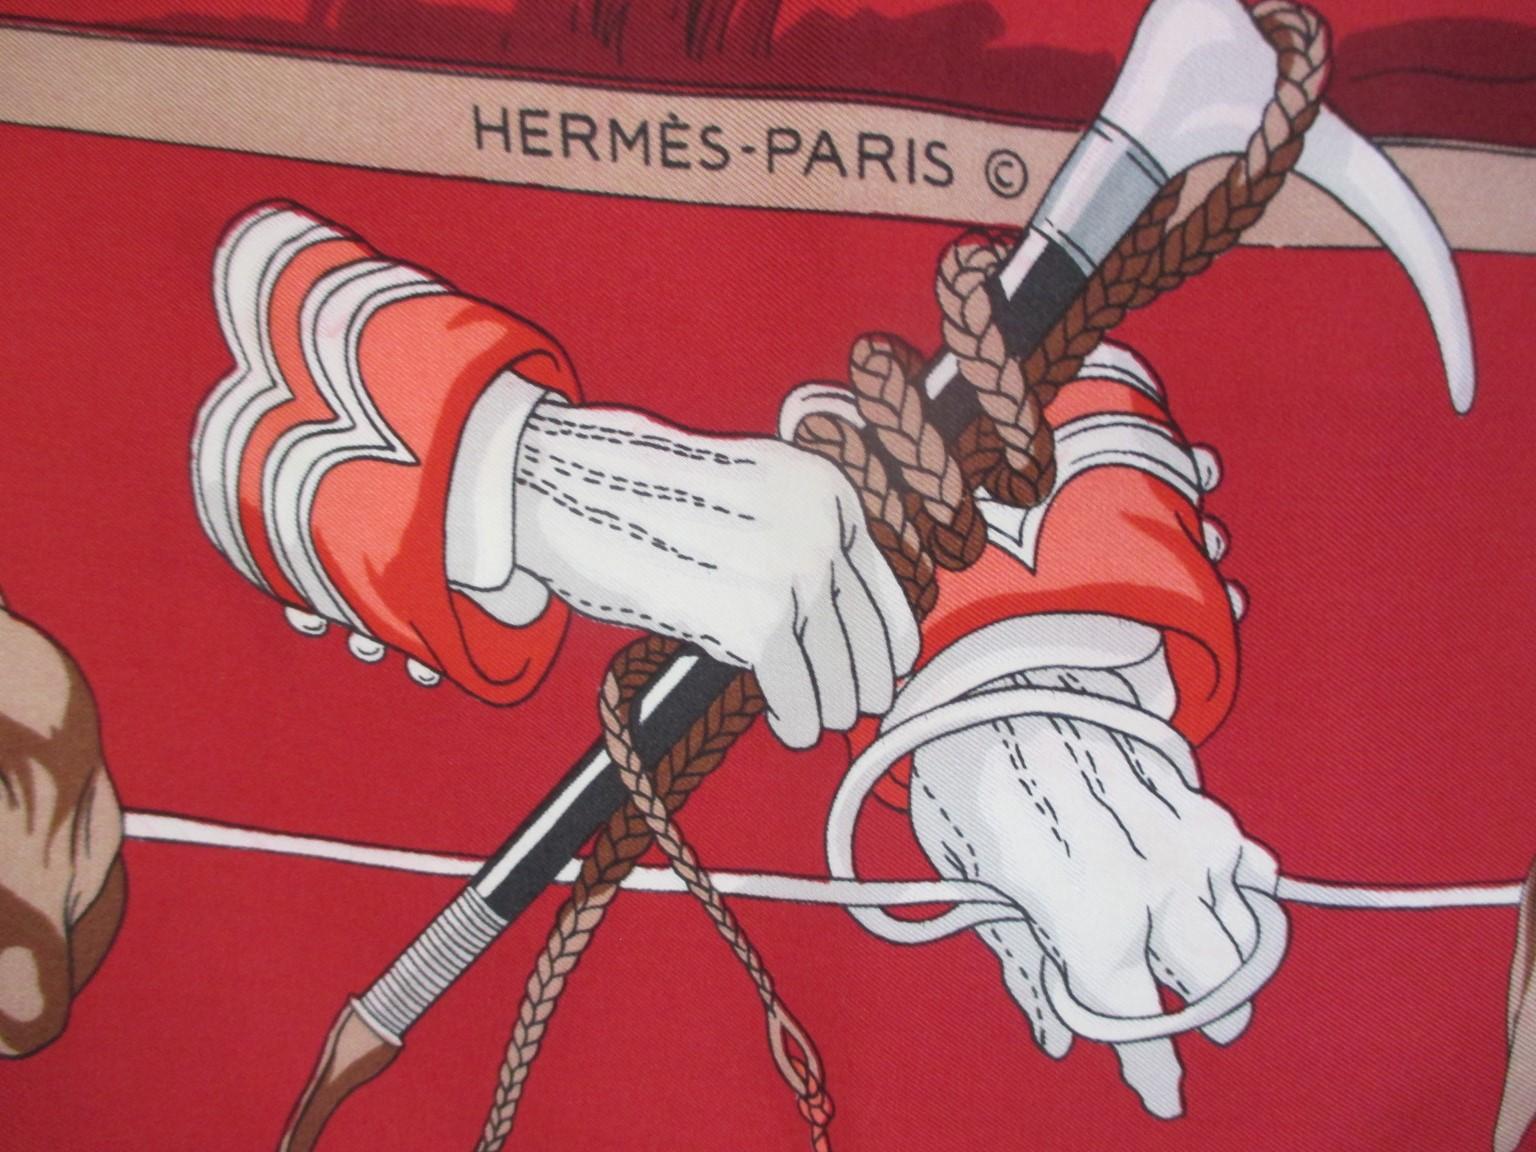 A vintage silk scarf by Hermes styled with classic hunting scene and hound border, on a red background.
This Hermès is a true collector's scarf in collector's condition, one to own to wear, show or frame. 

Measurements: Length 77cm x Width 80cm
